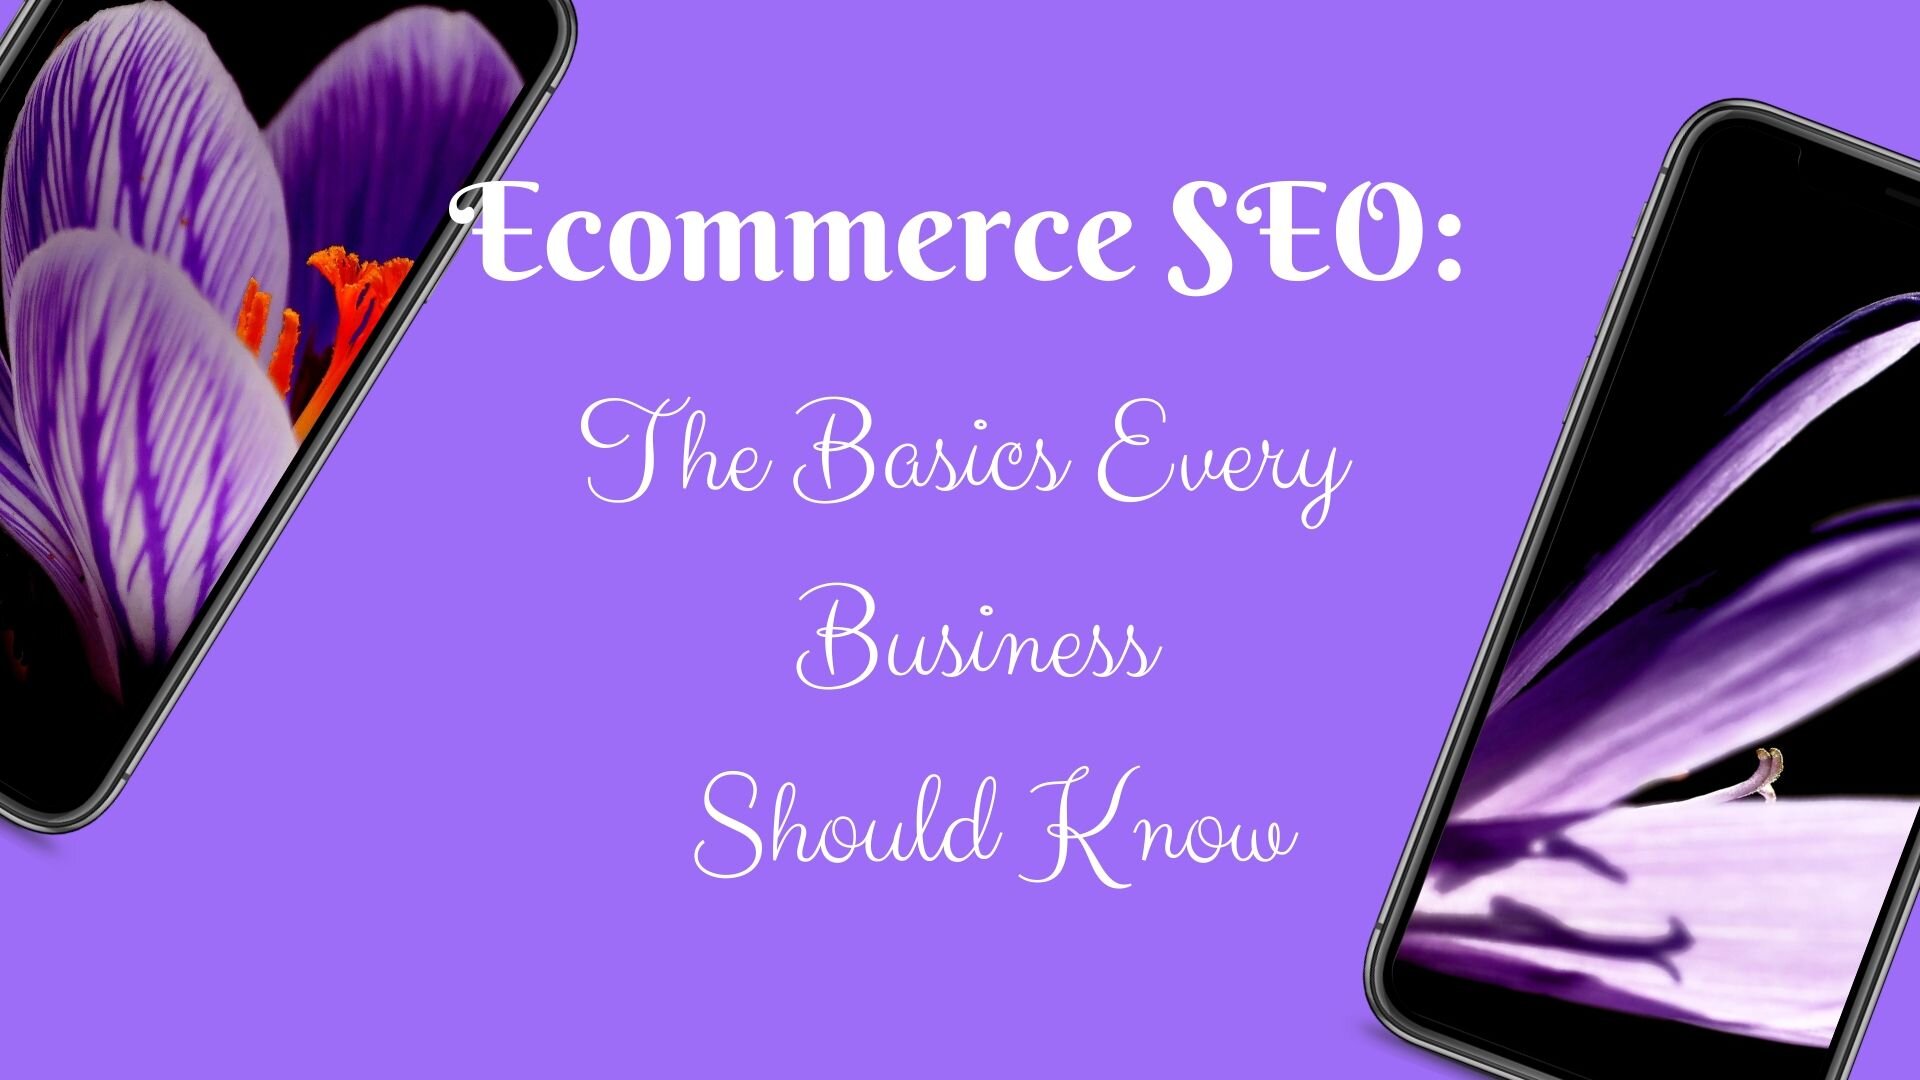 Ecommerce SEO: The Basics Every Business Should Know